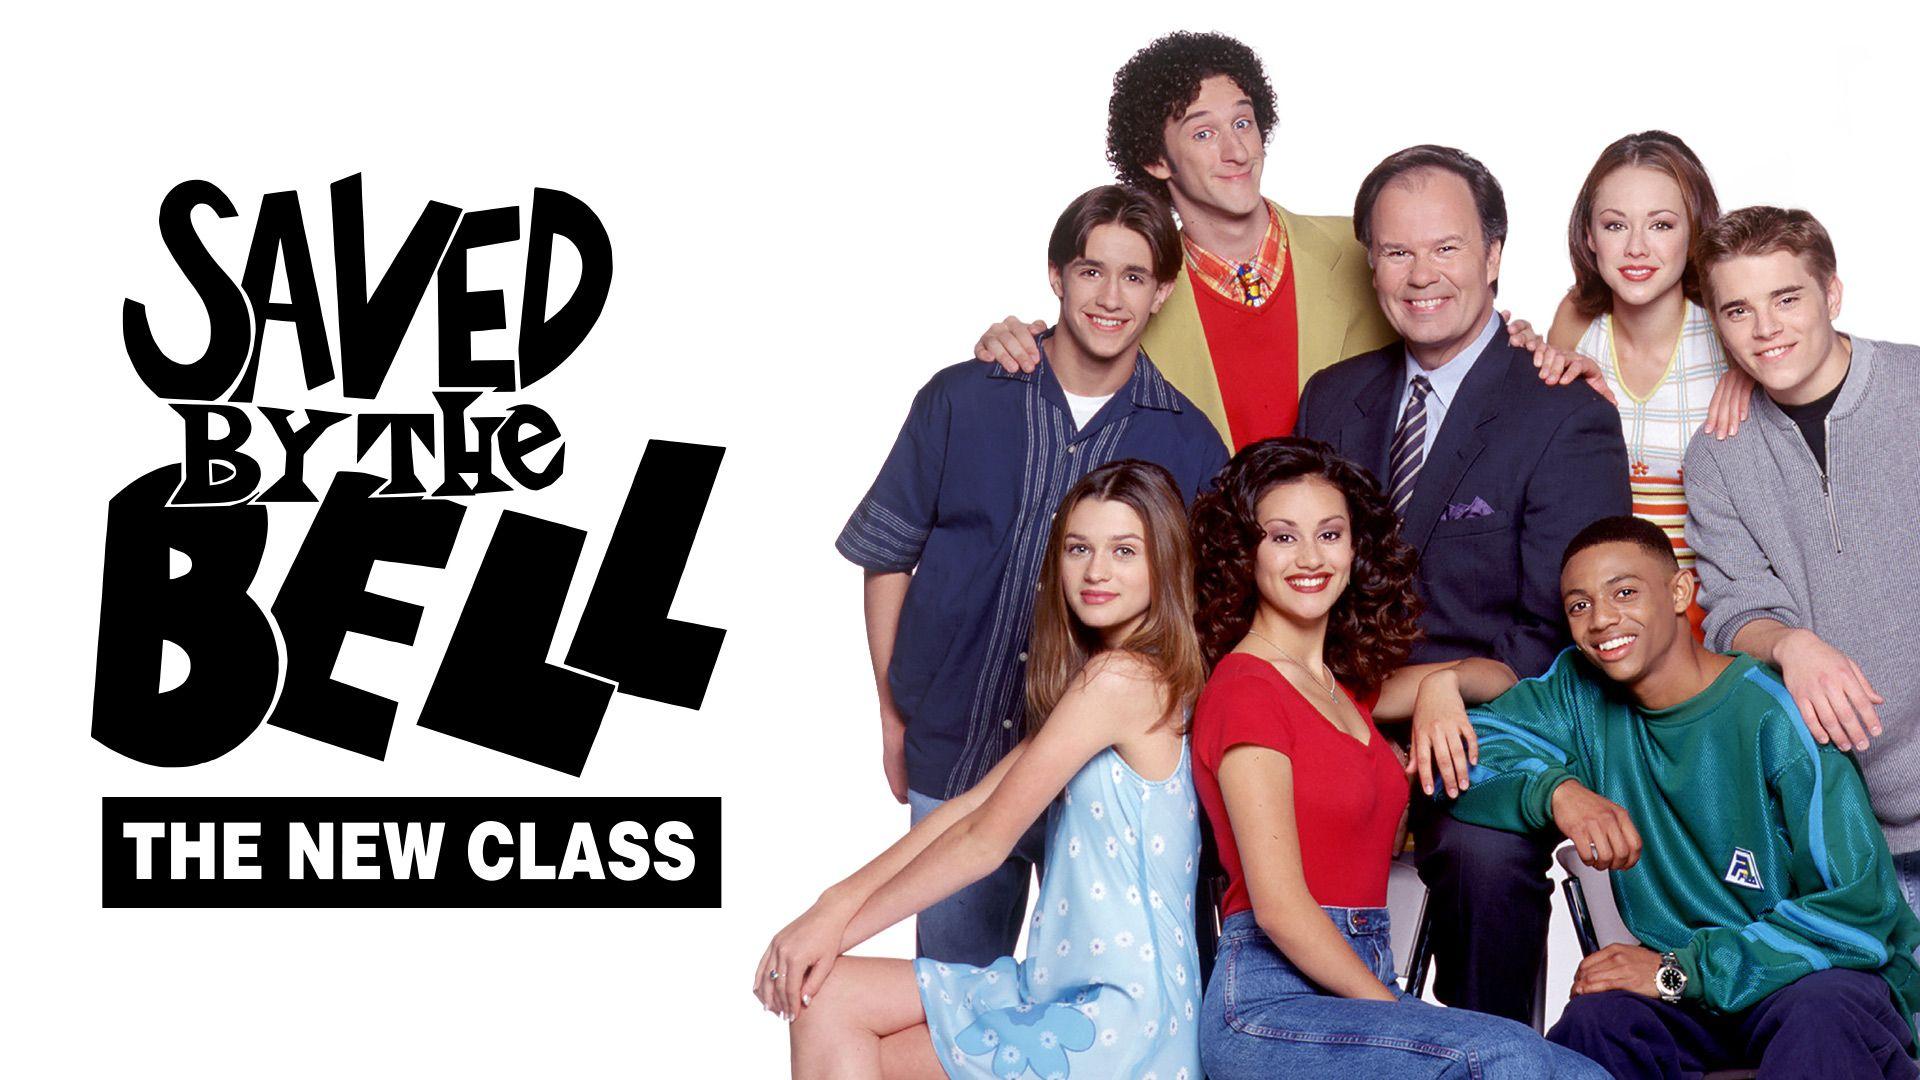 Saved by the Bell: The New Class Season 5 Episodes.